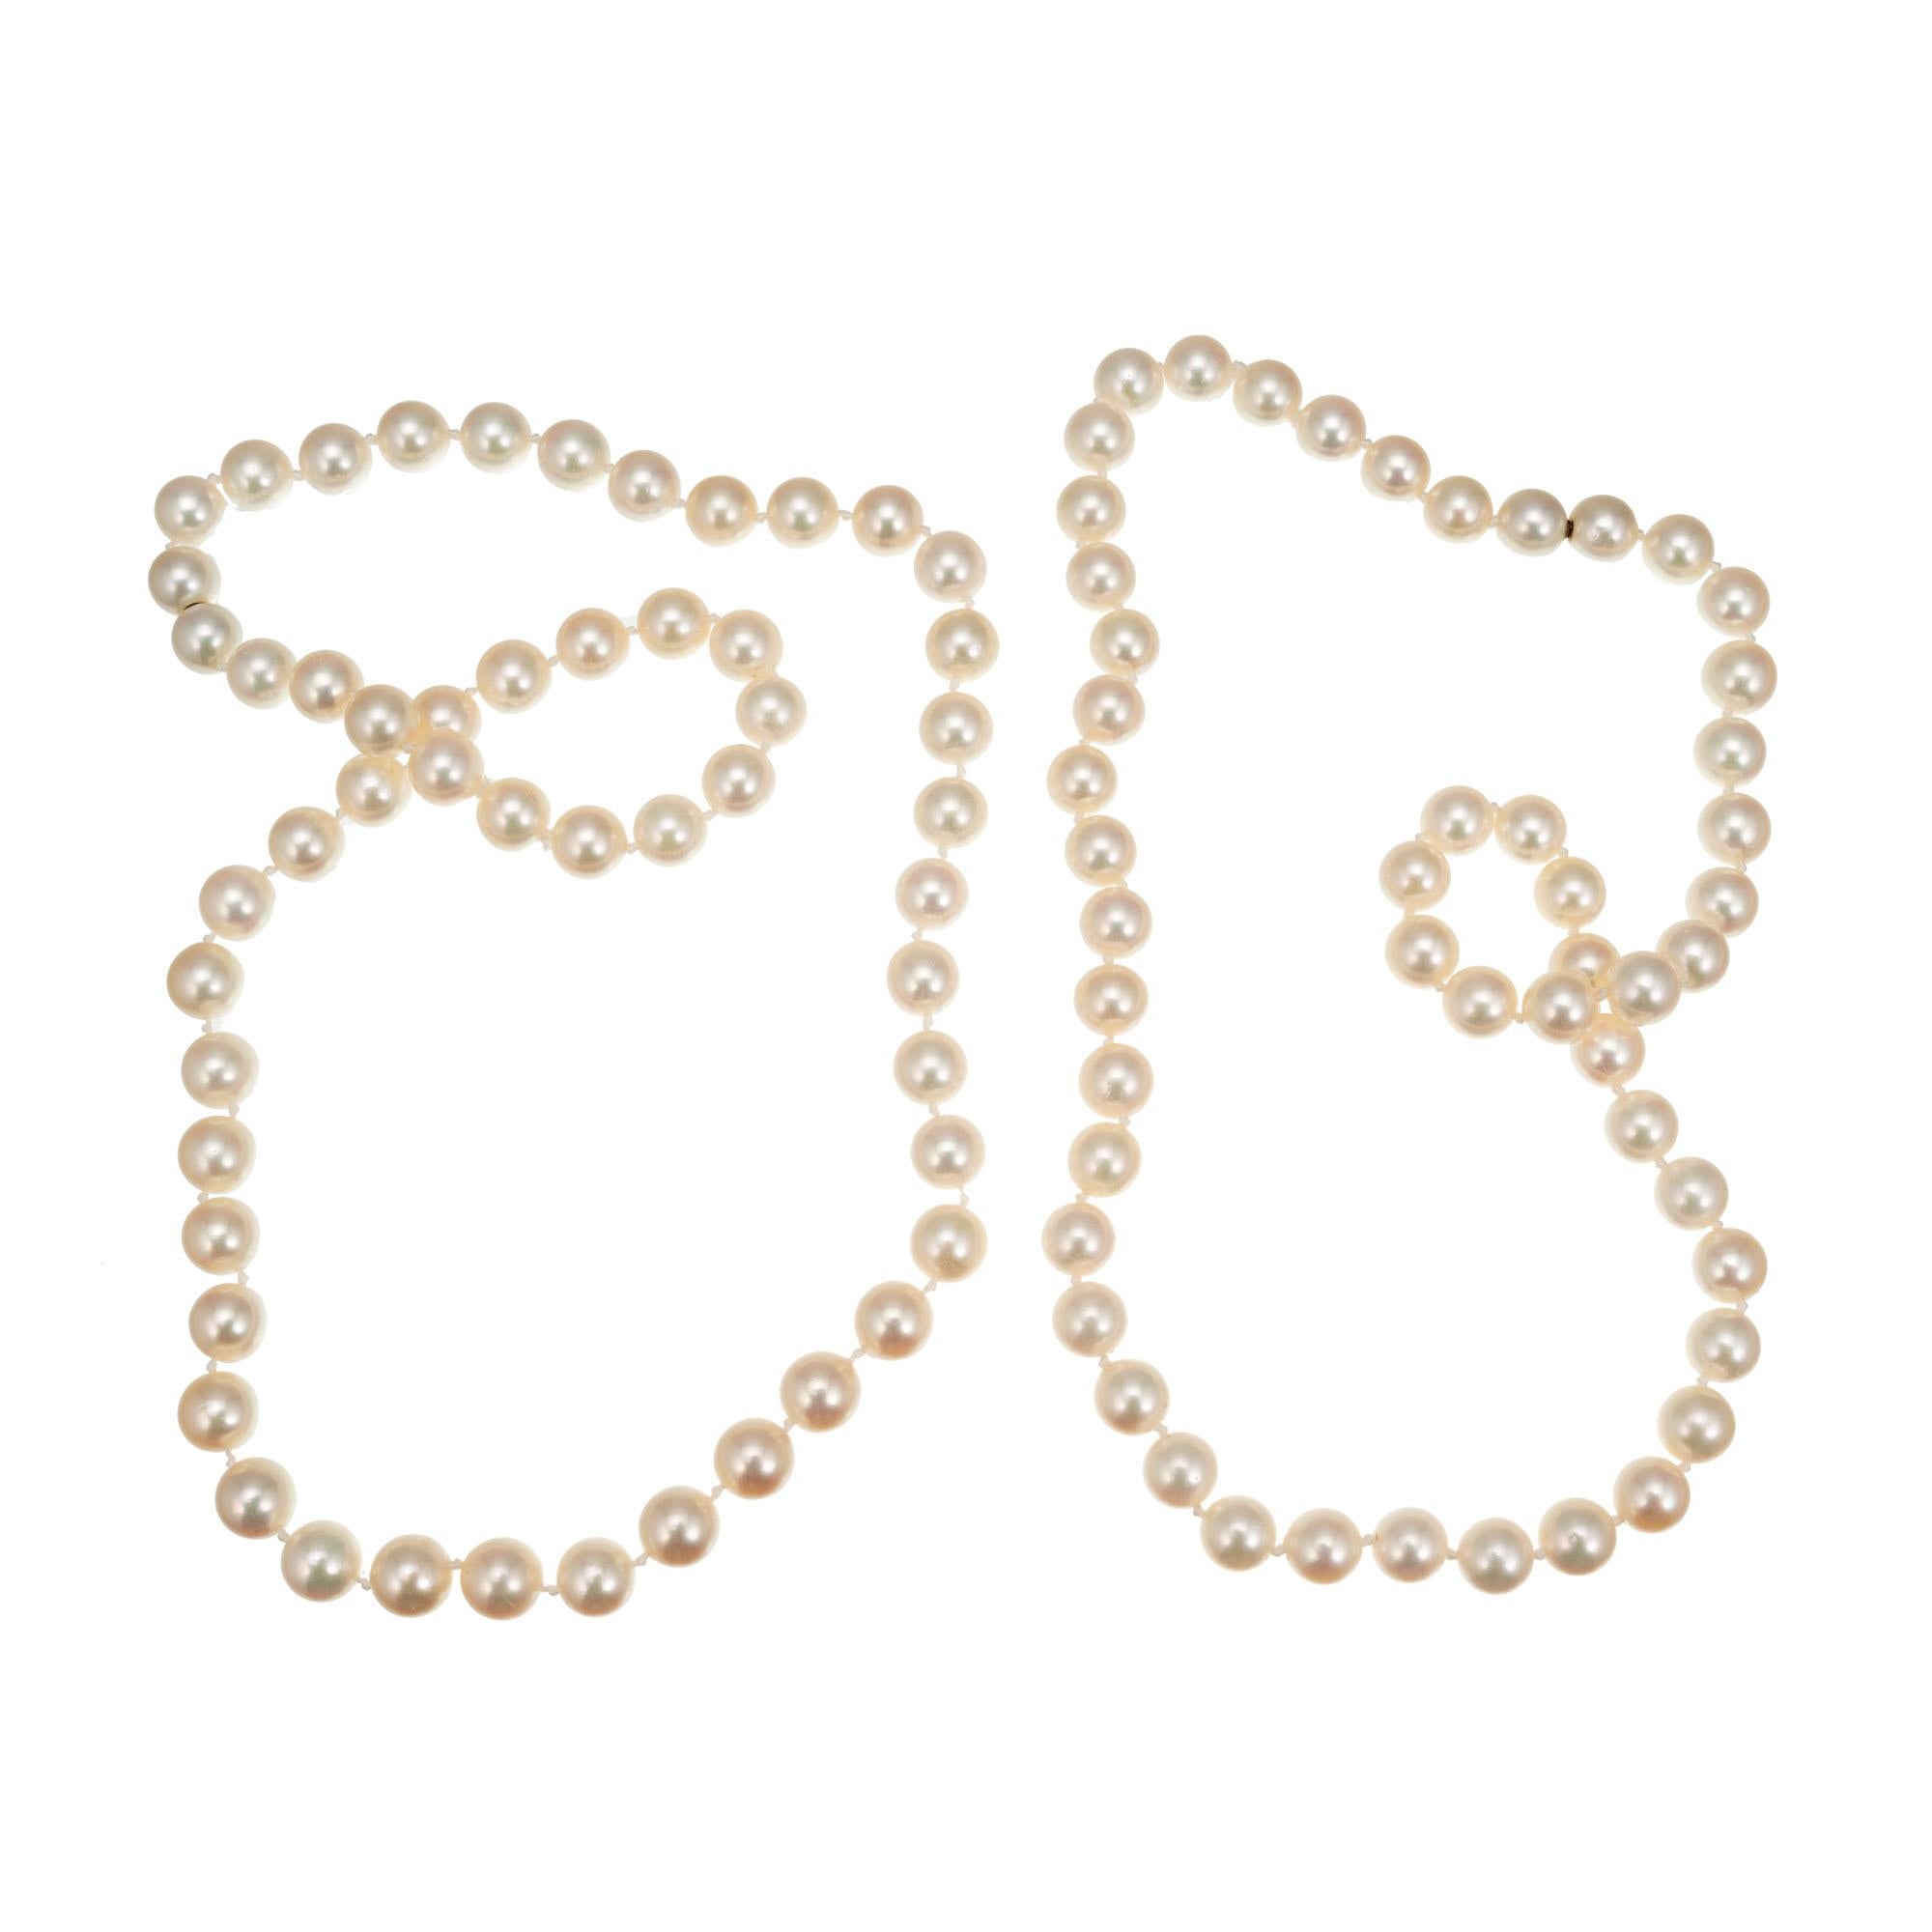 Cultured pearl necklace set with 7.5 to 8mm pearls. 17 Inch and 19 Inch necklaces, both with mystery clasps that allow them to be worn separately, together as a two-strand necklace or joined.

51 cultured white with pink overtones 7.5-8mm pearls
53